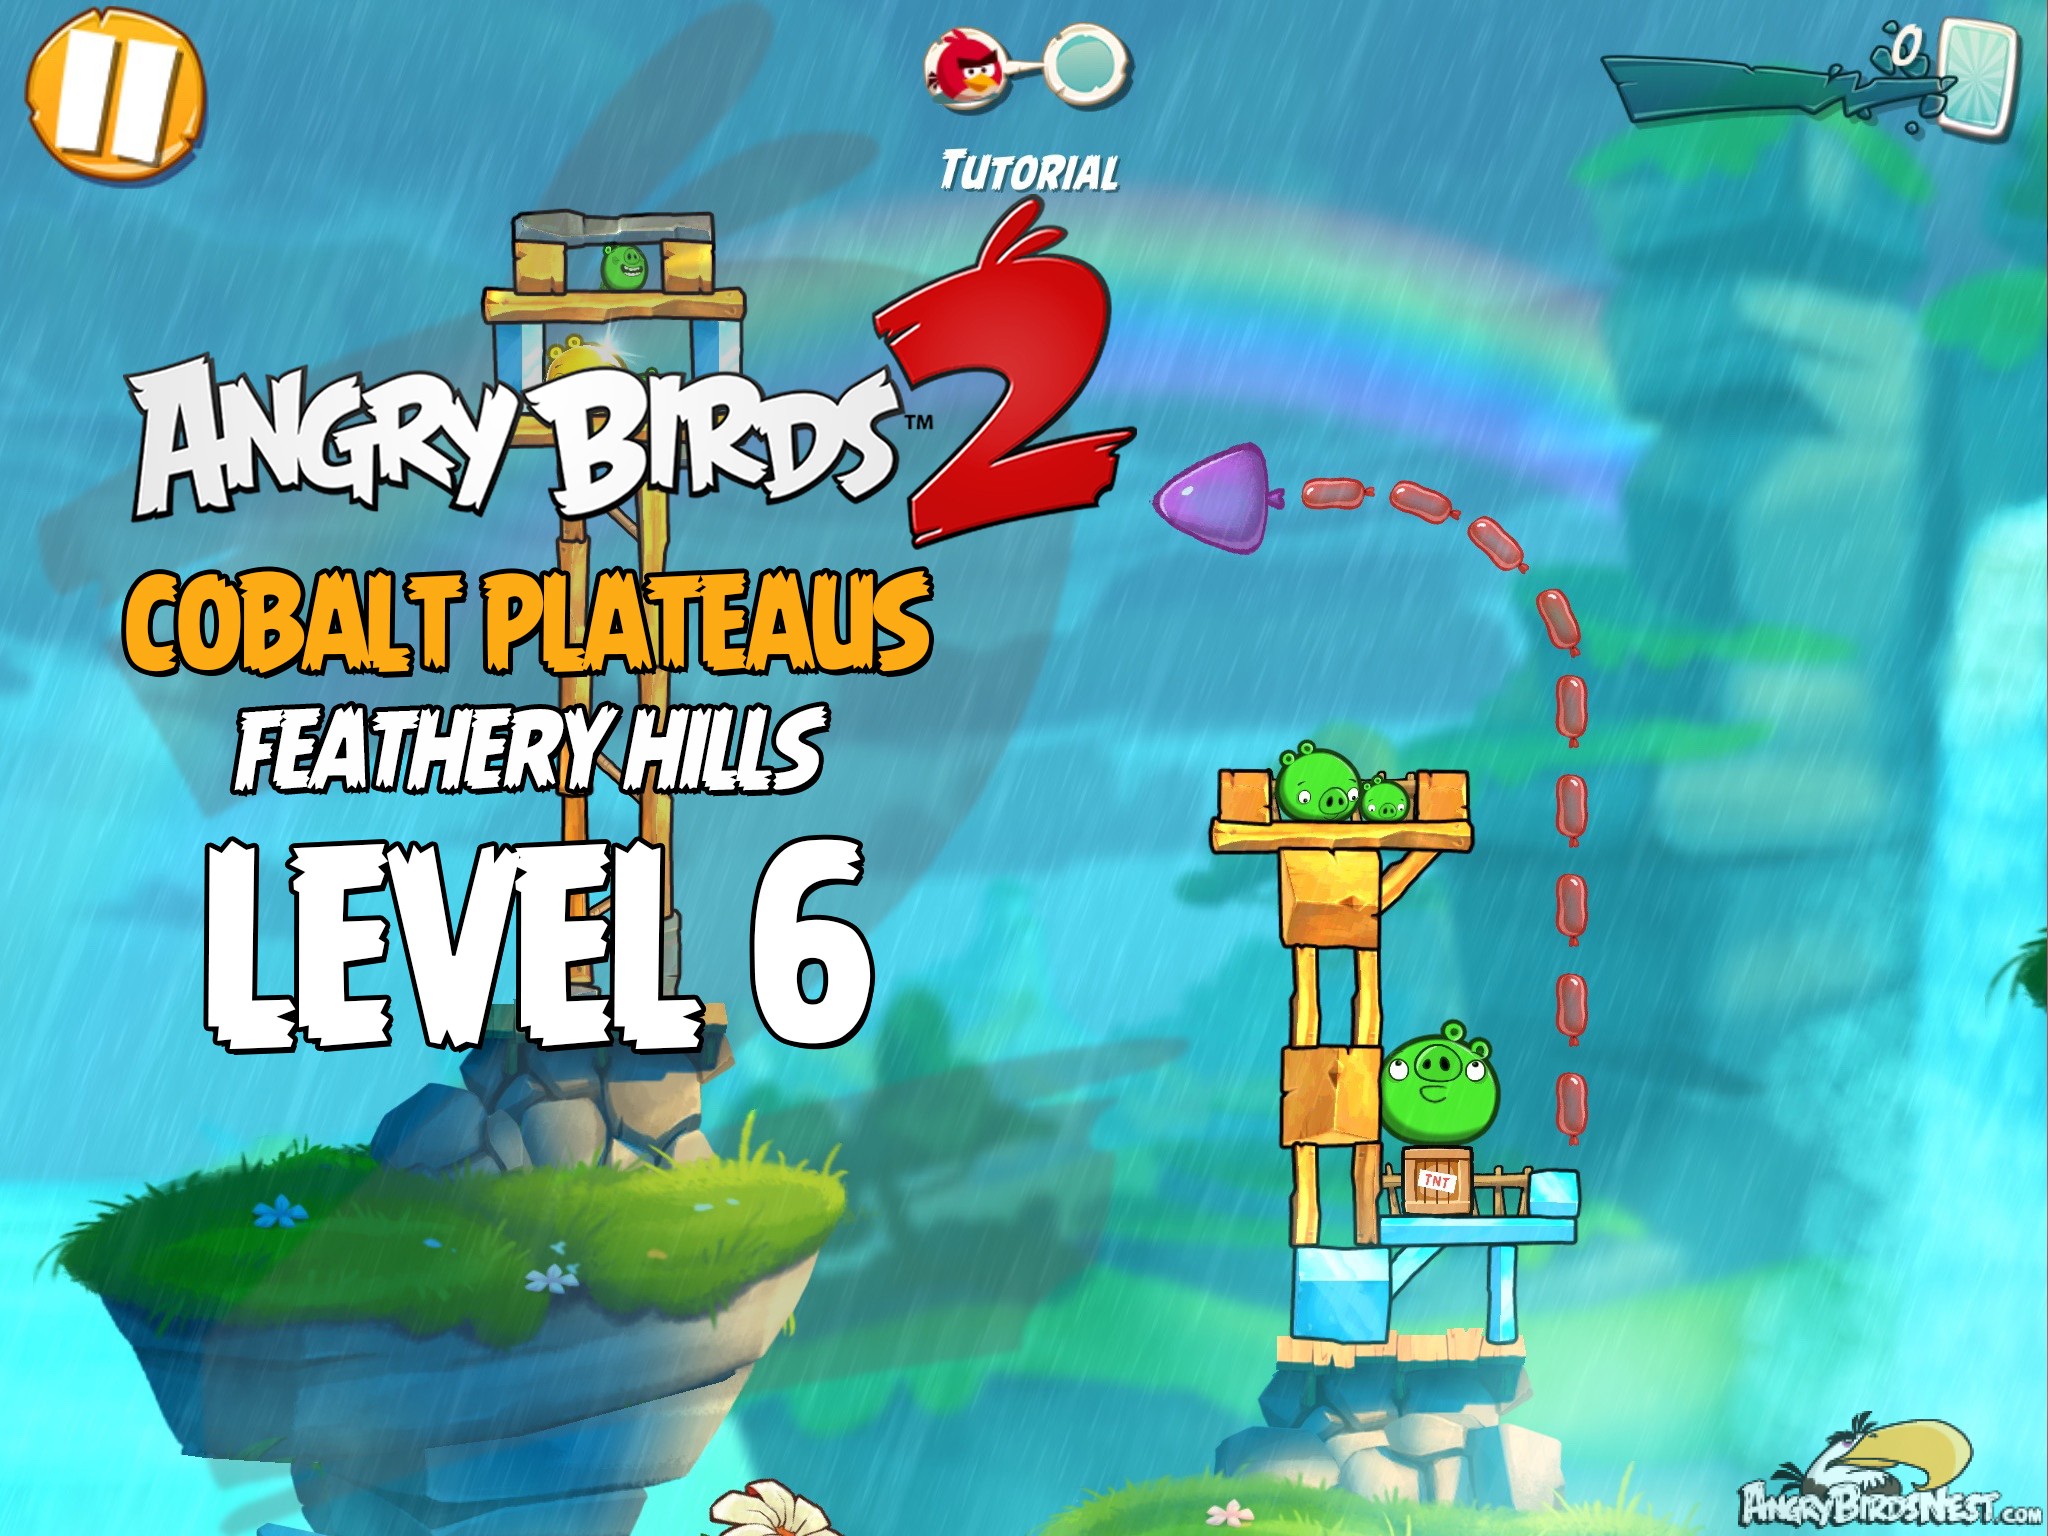 Angry Birds 2 Cobalt Plateaus Feathery Hills Level 6